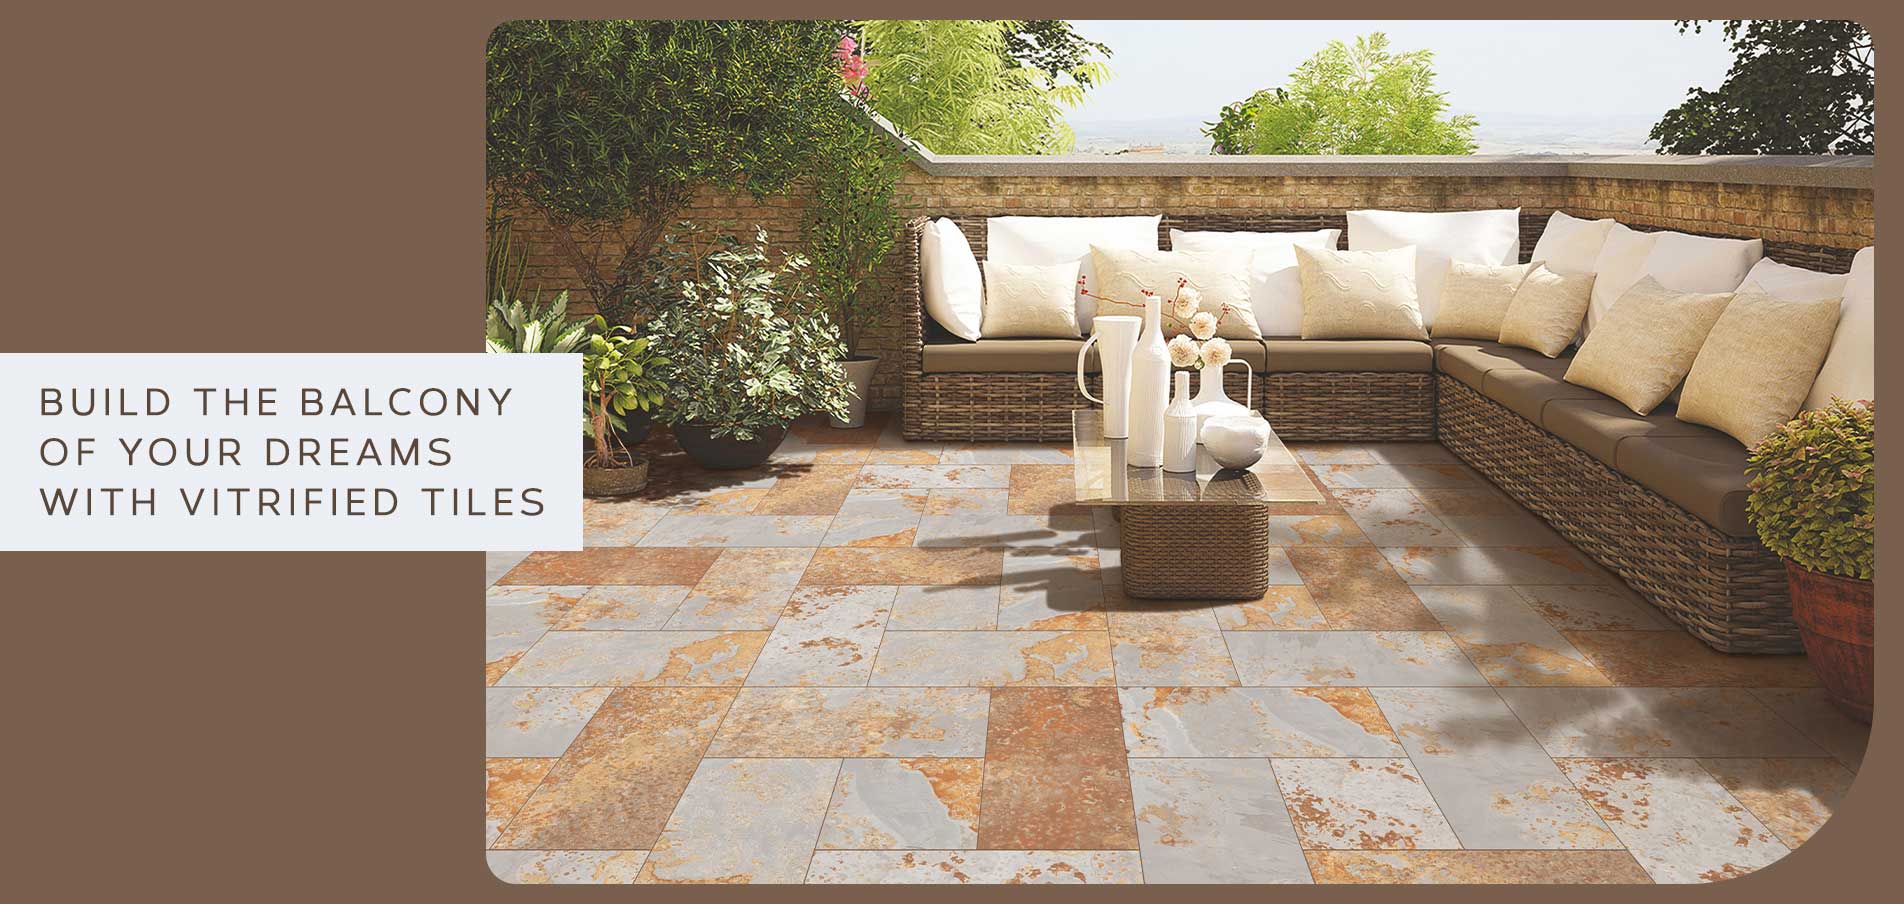 Build the Balcony of Your Dreams with Vitrified Tiles by Simpolo